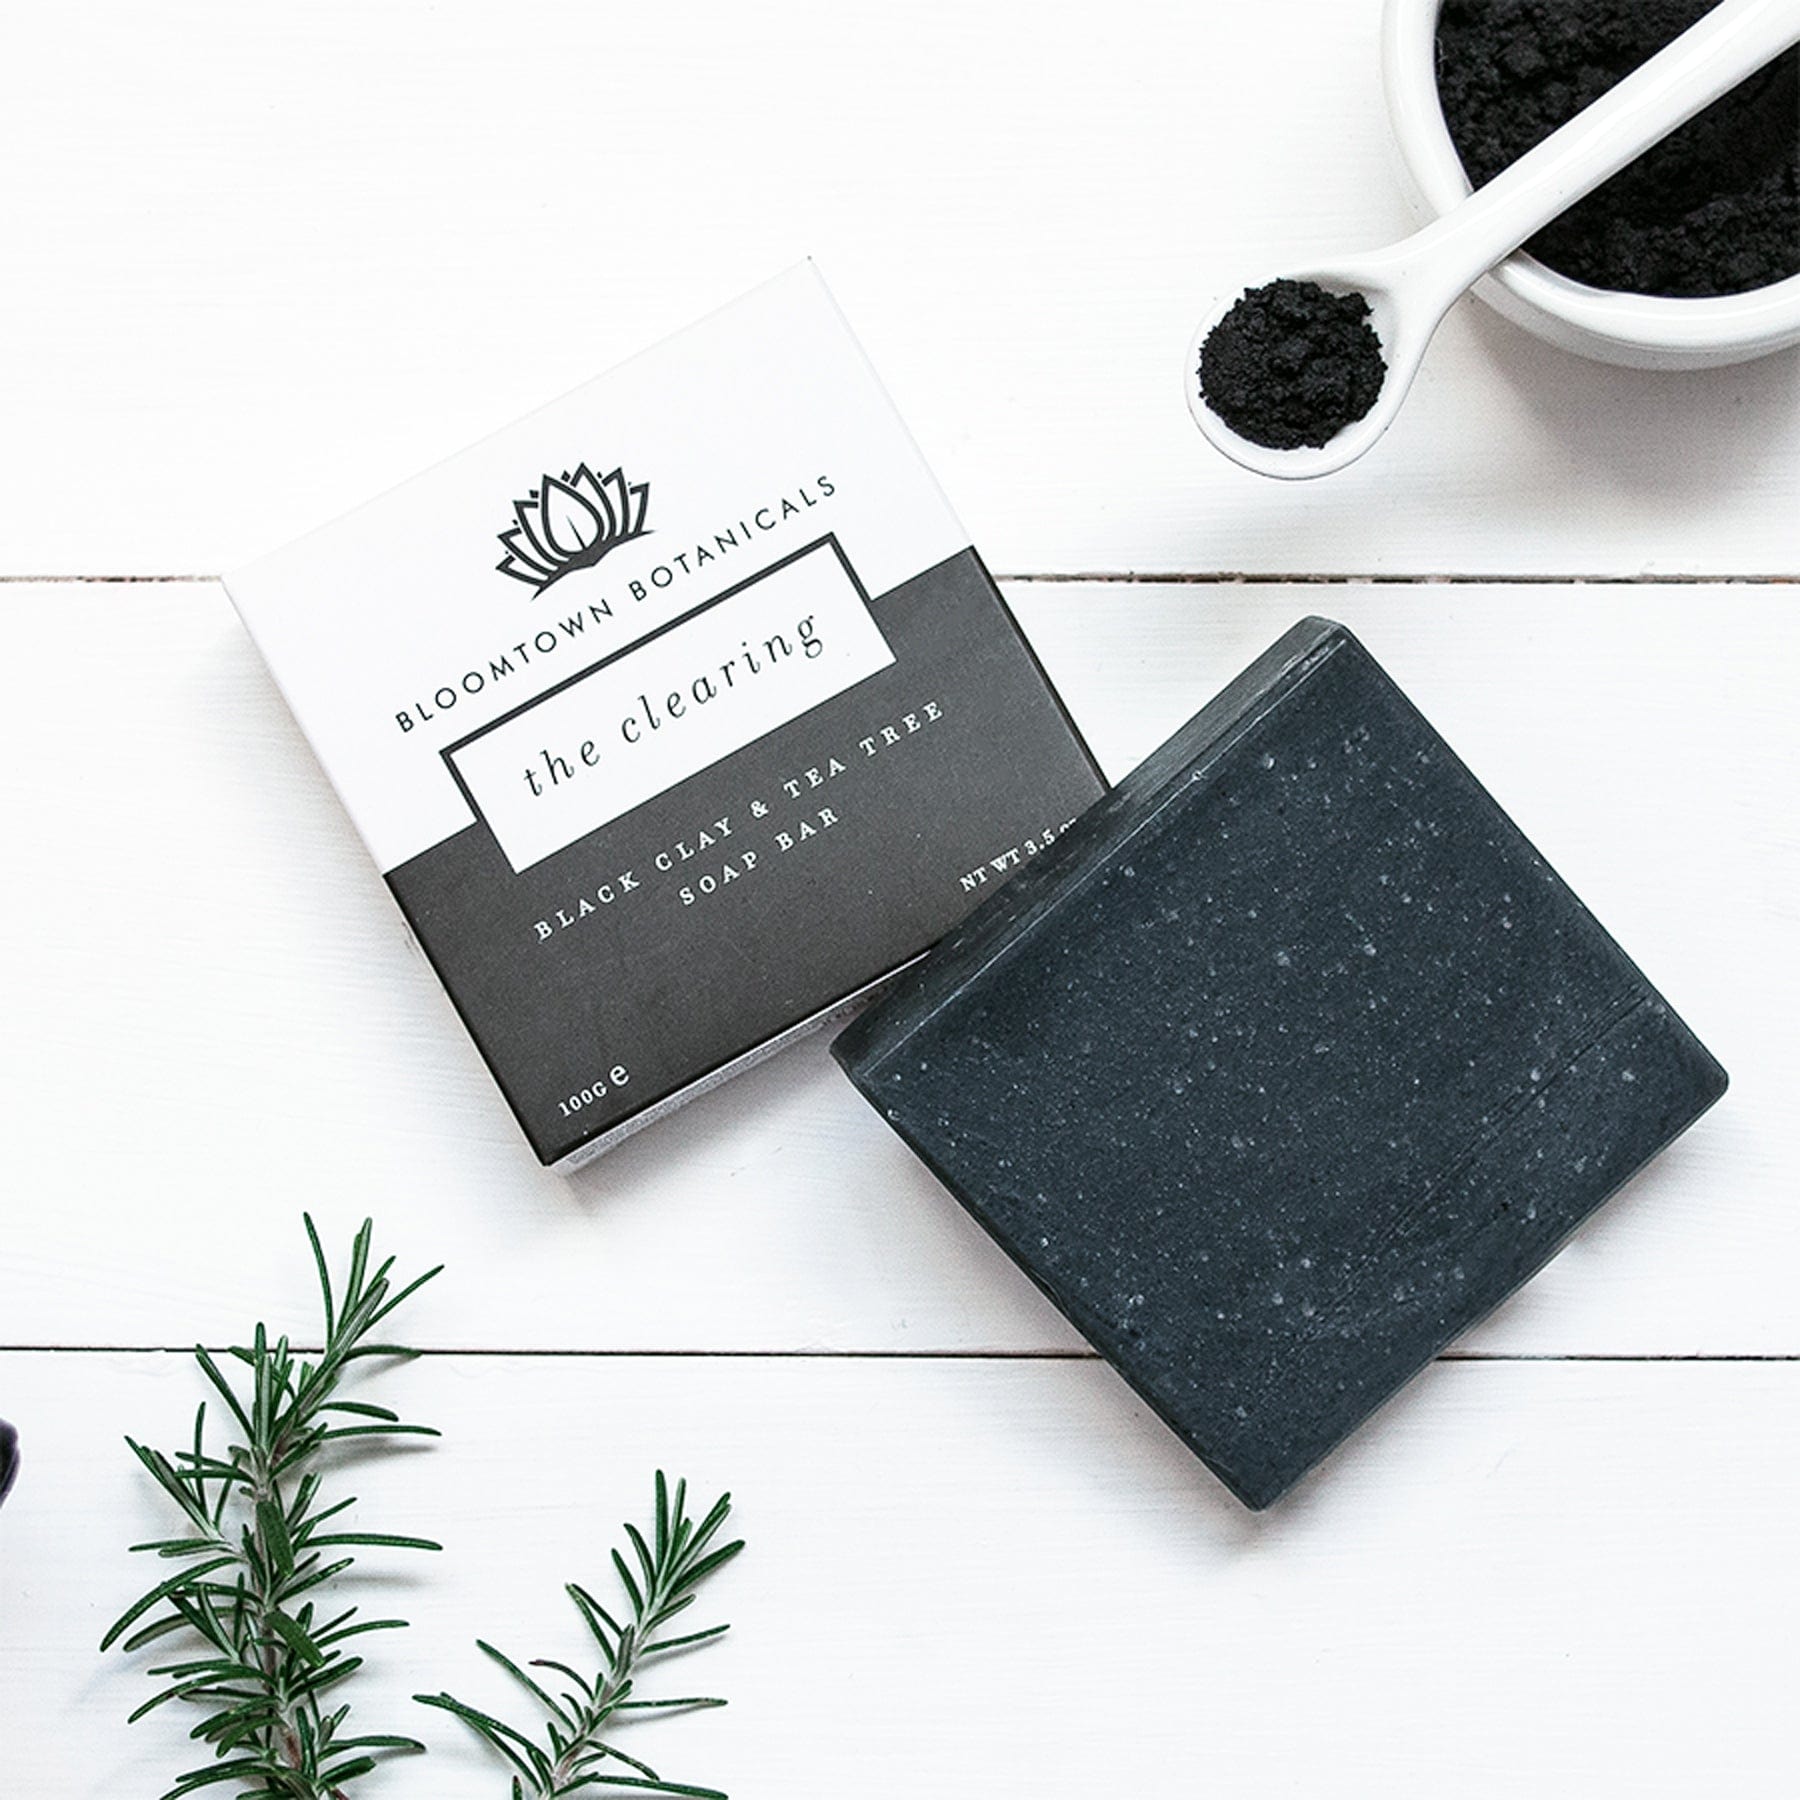 Soap - the clearing - black clay & tea tree